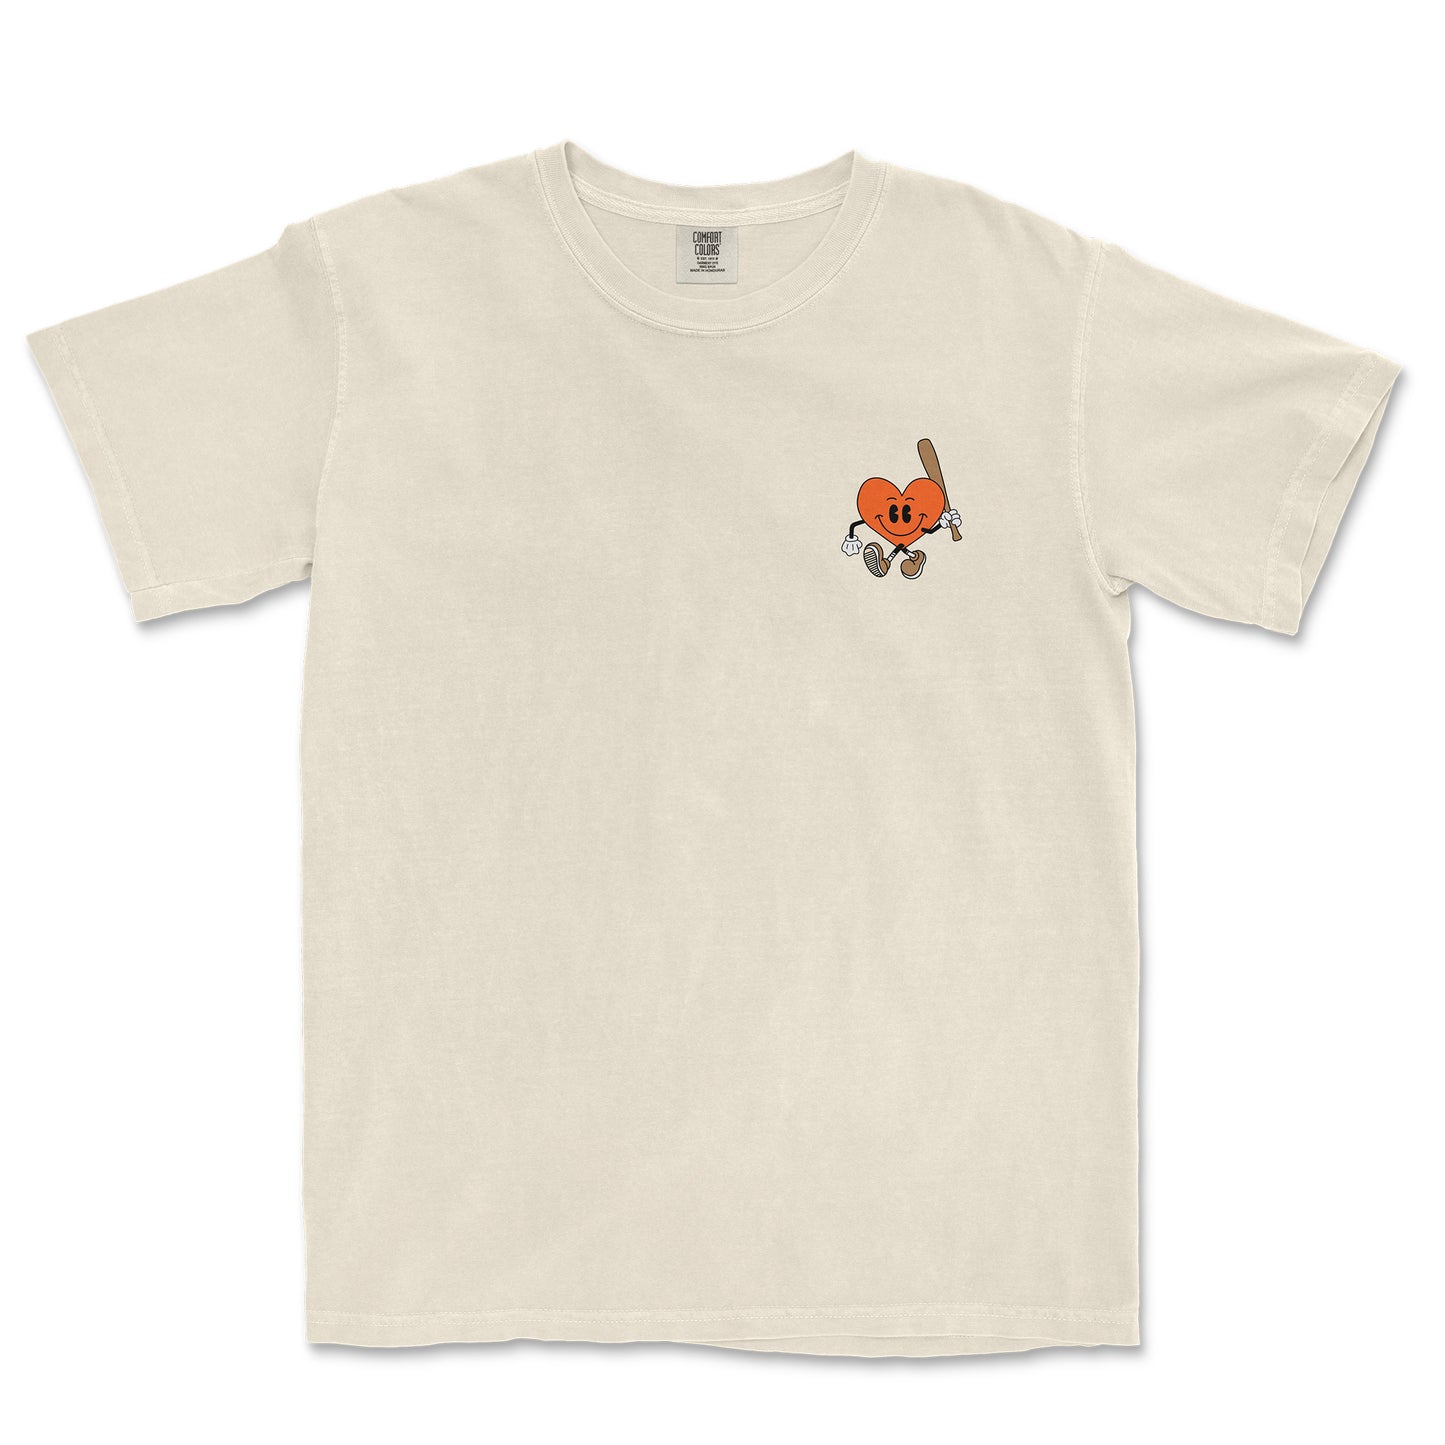 NAME 5 PLAYERS | COMFORT COLORS® VINTAGE TEE